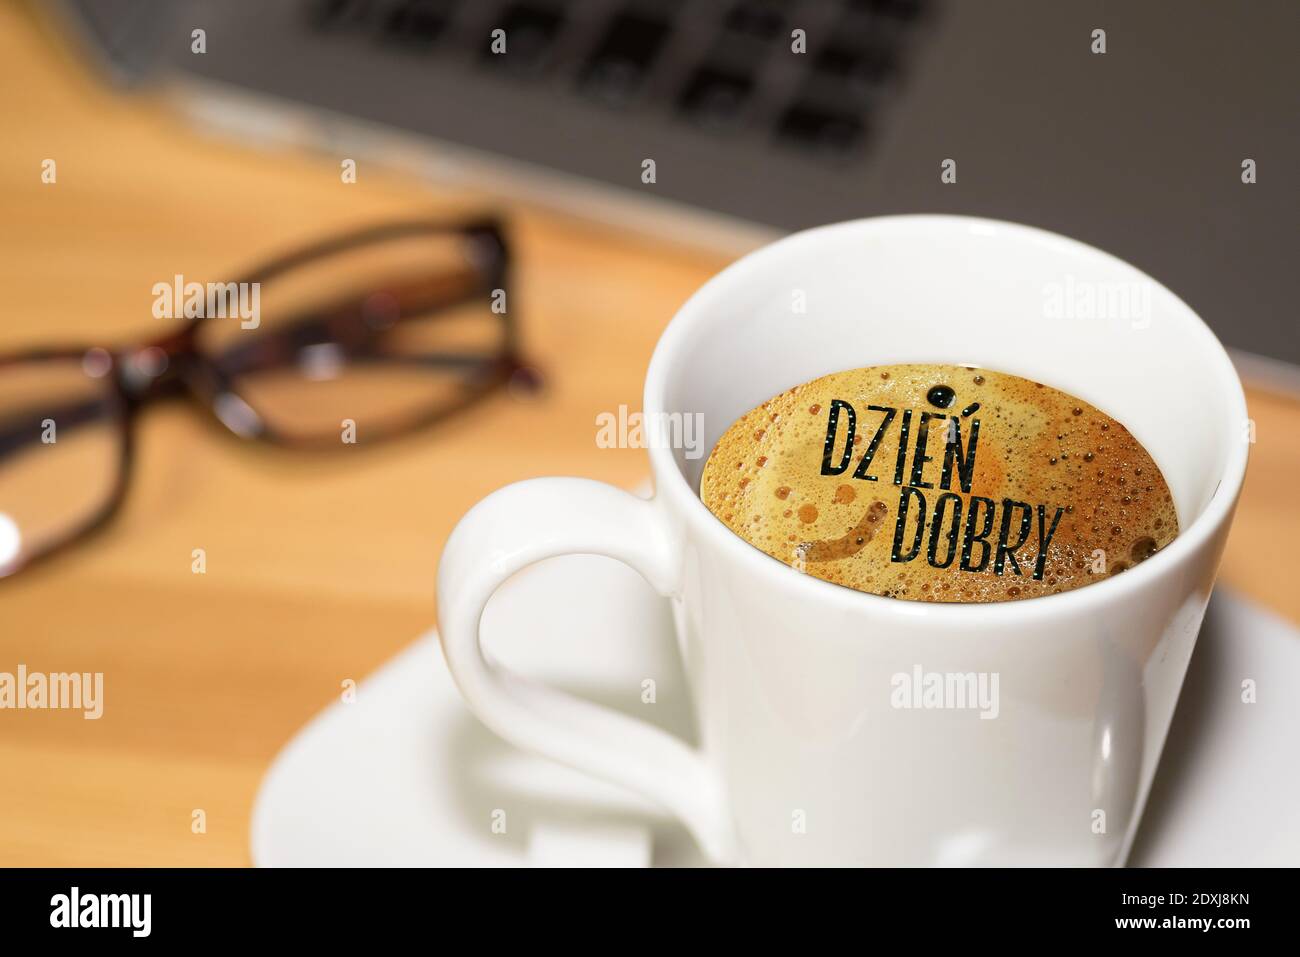 Dzien Dobry High Resolution Stock Photography and Images - Alamy